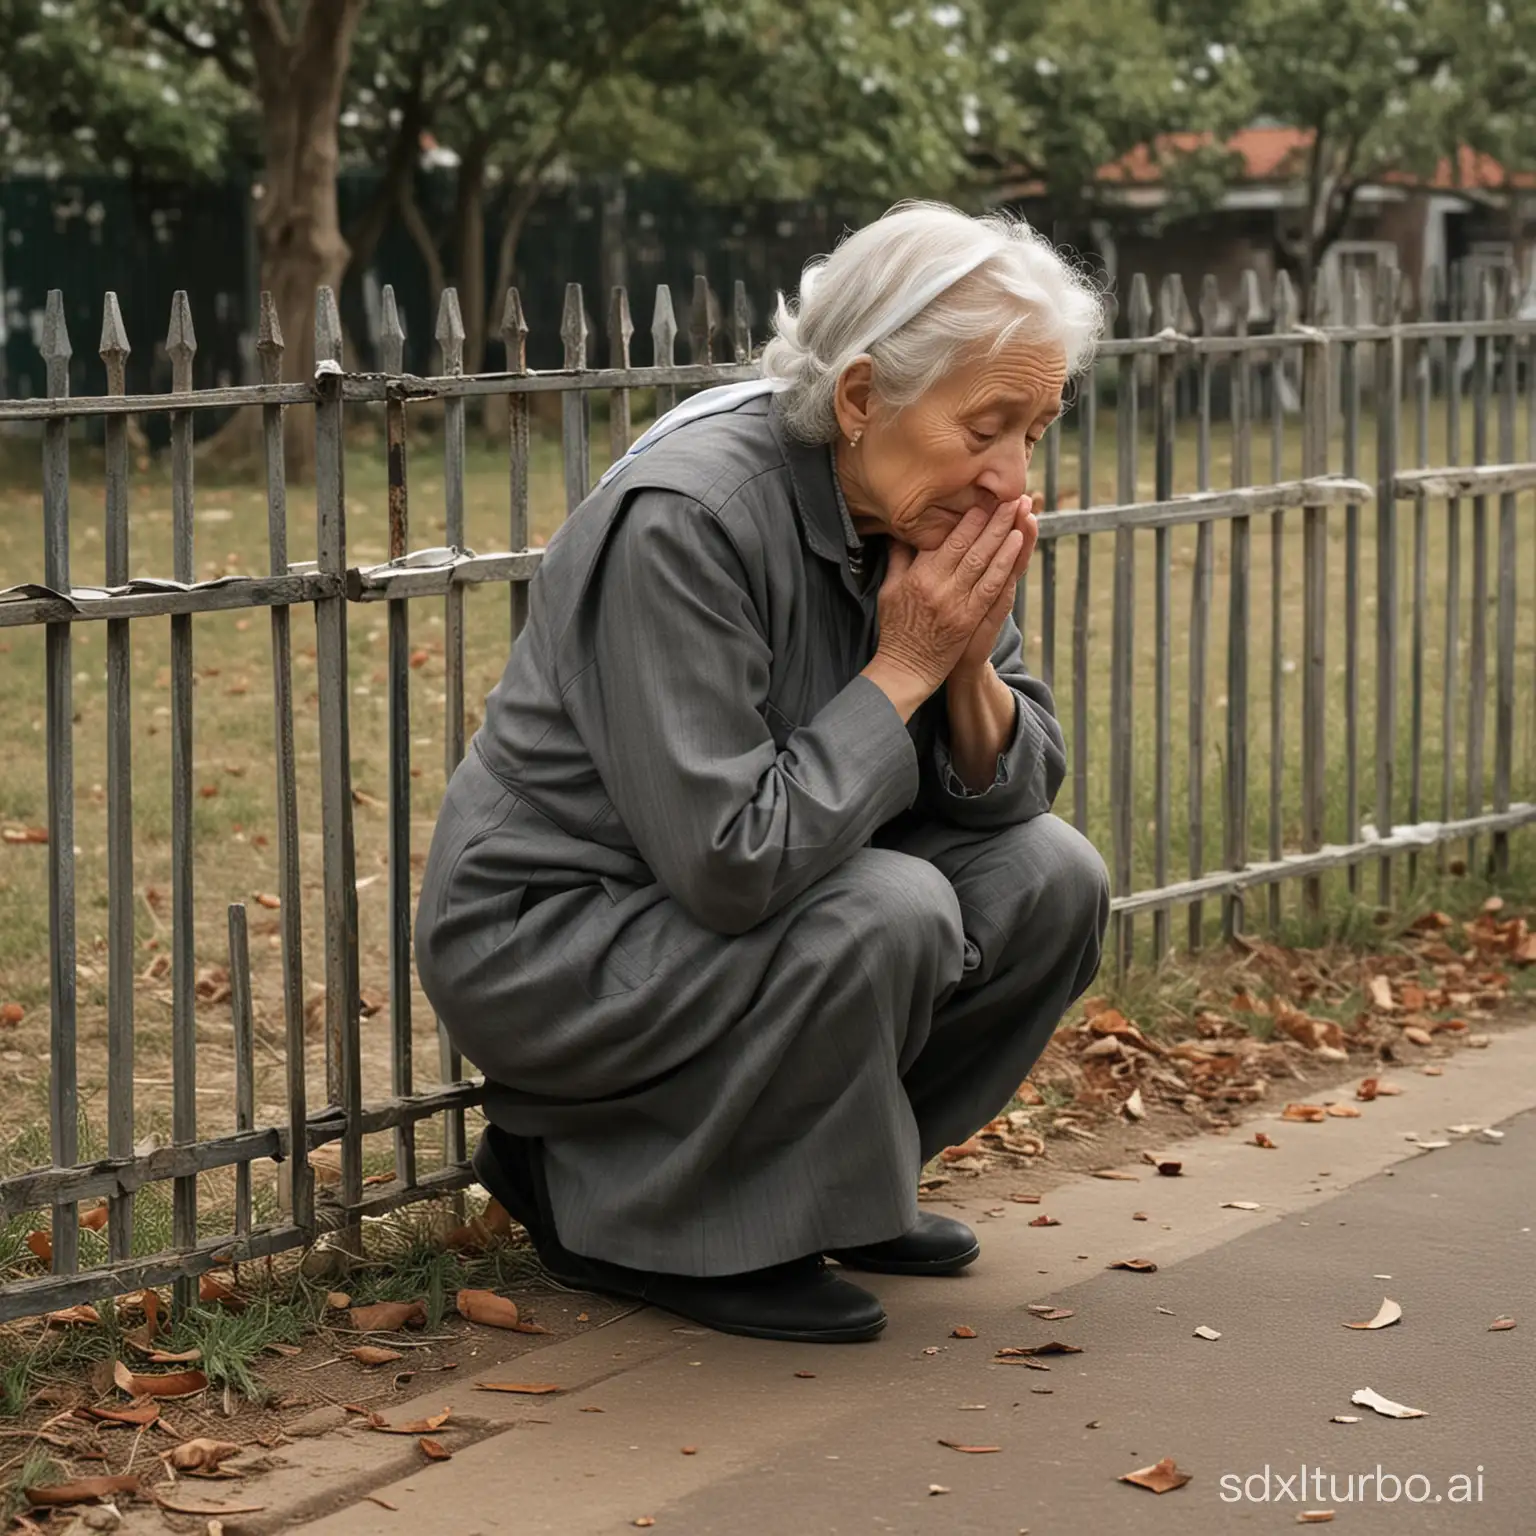 Draw a grandmother kneeling at the school gate, her soul floating beside her grandmother crying, her soul has been hovering at the scene of the crime, wanting to go home but unable to return, the body has perished.